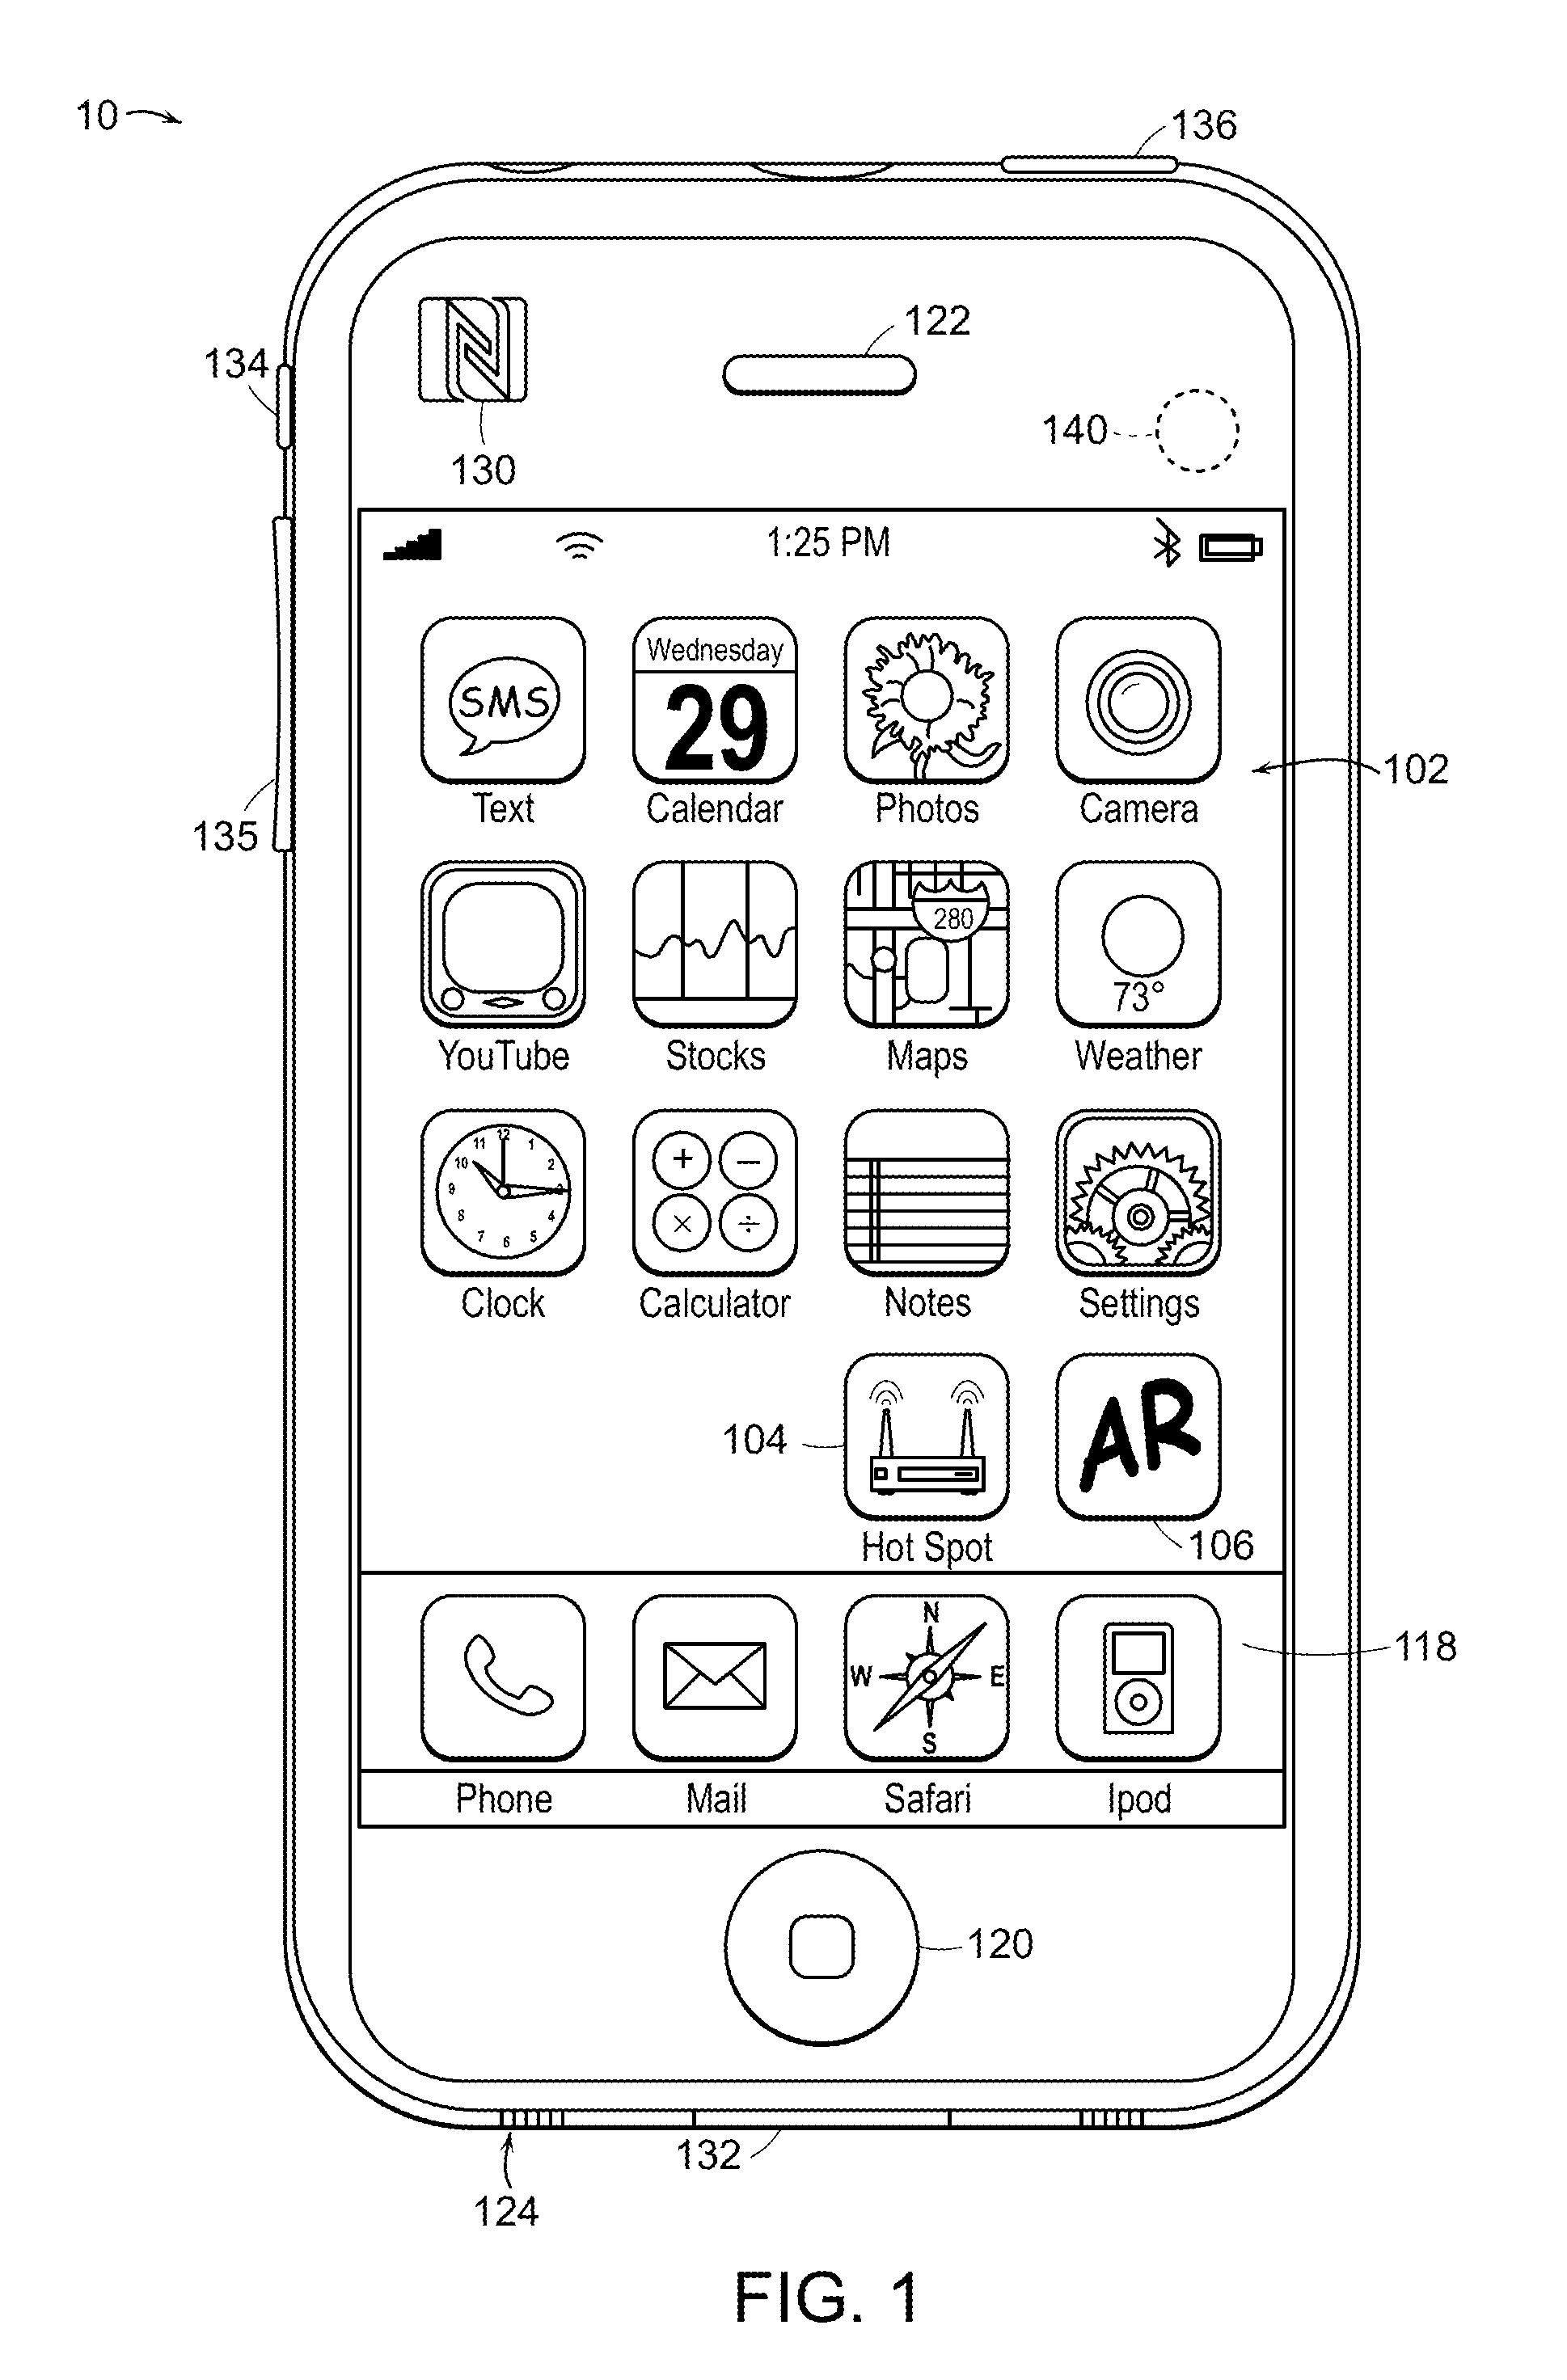 System and Method for Creating Content for an Event Using a Social Network